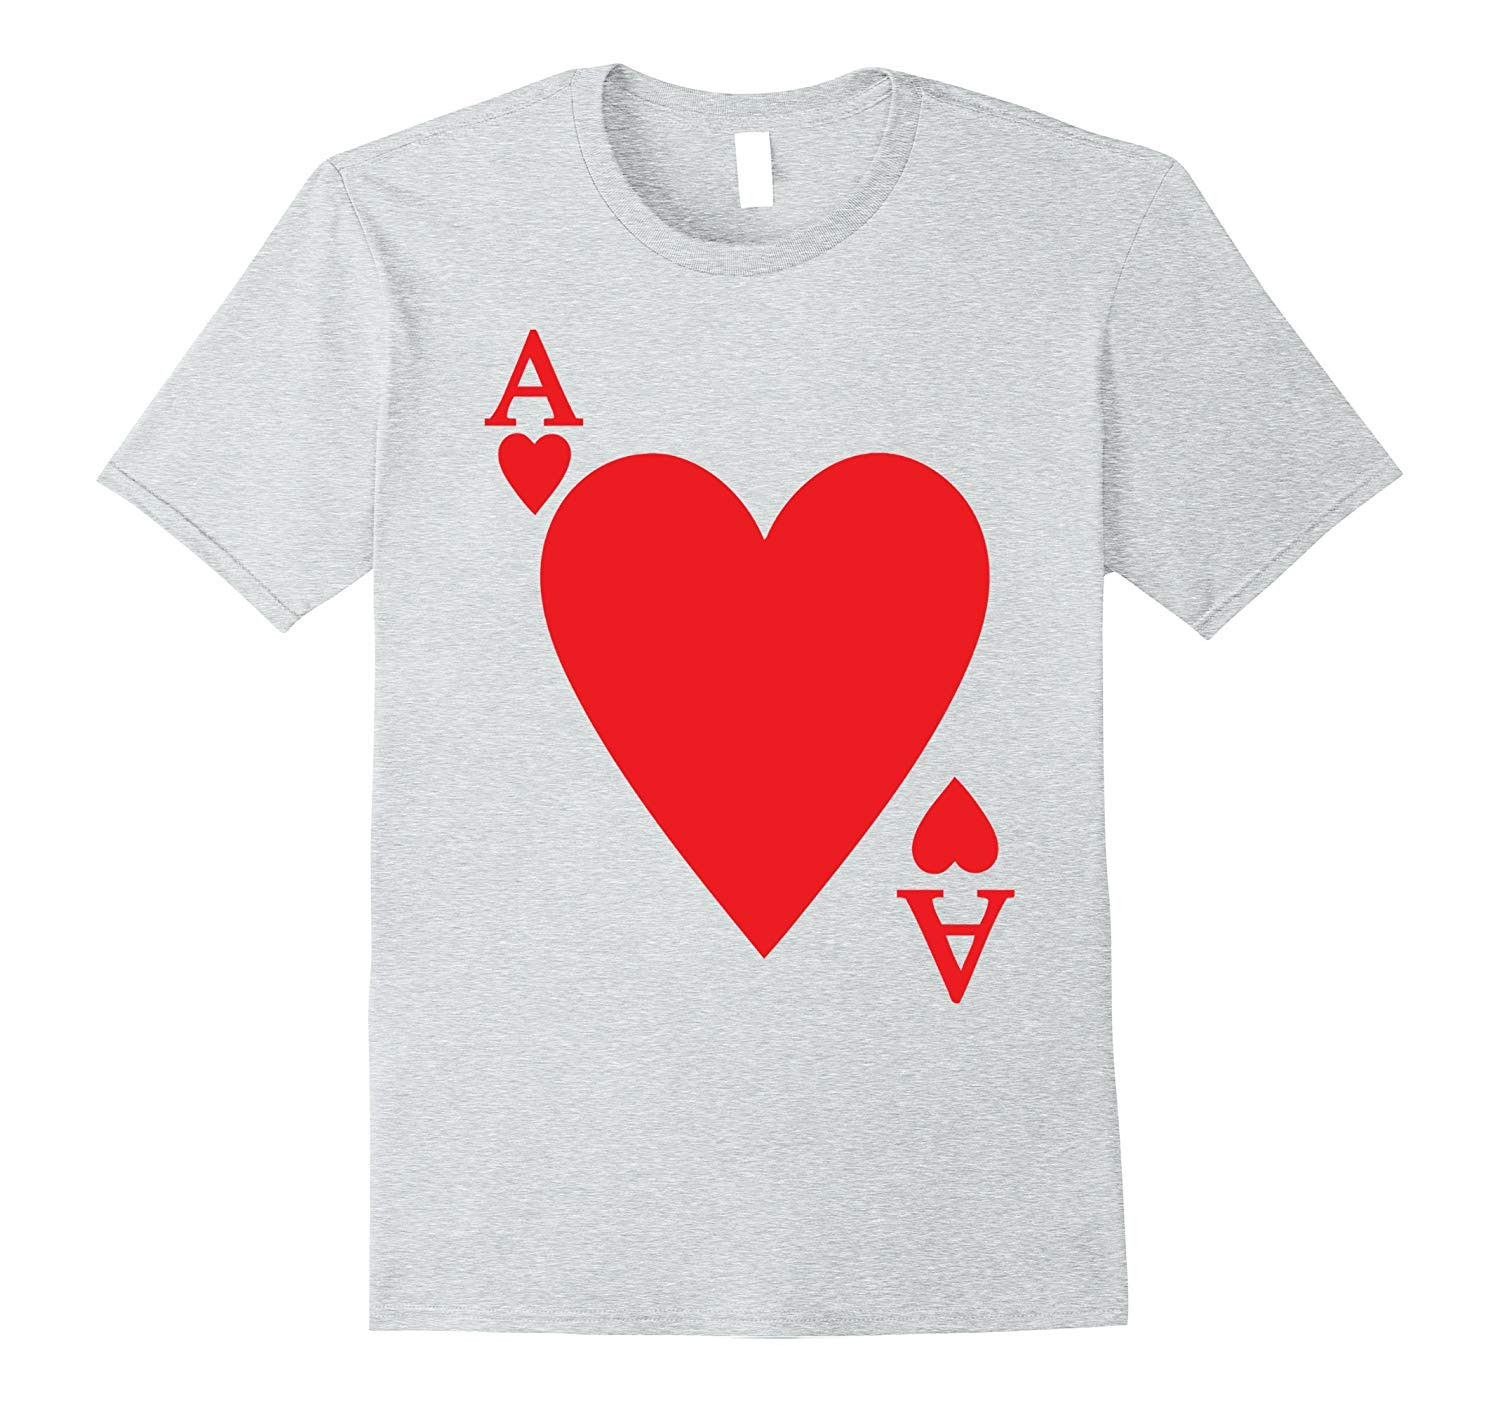 Deck Of Cards Halloween Costumes
 Deck Cards Halloween Costume Ace HEART Matching